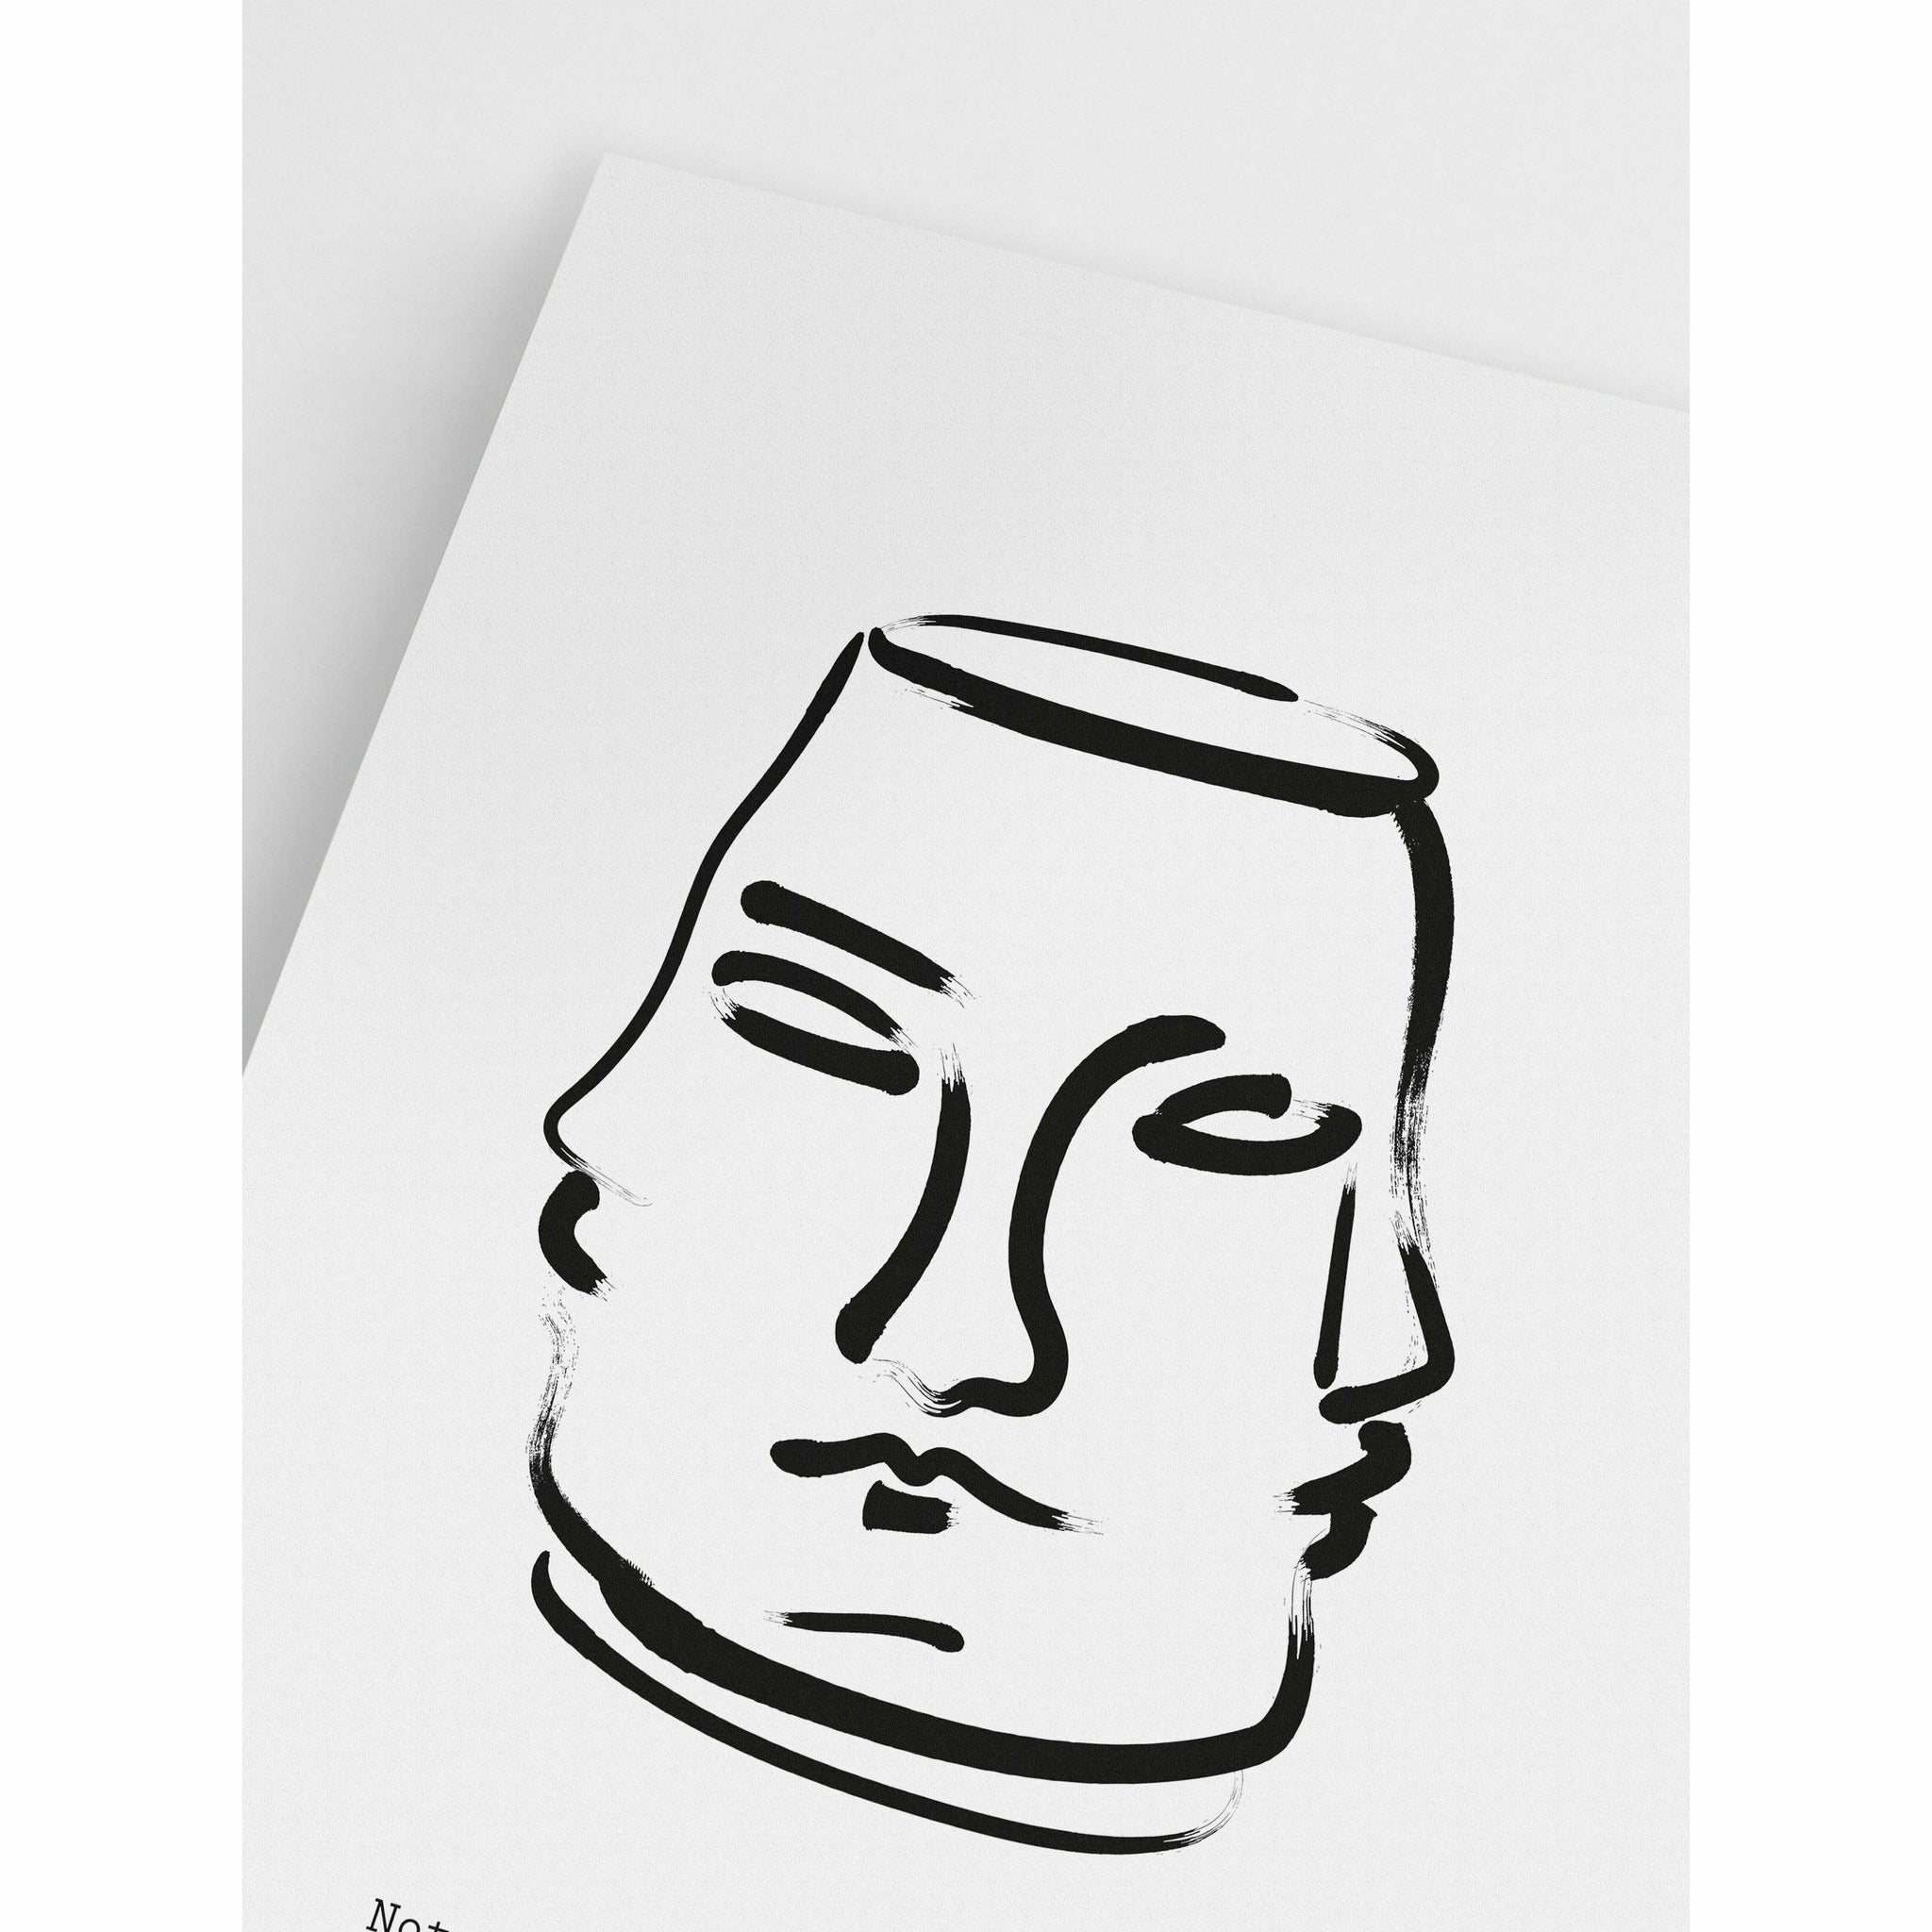 Abstract Face Poster